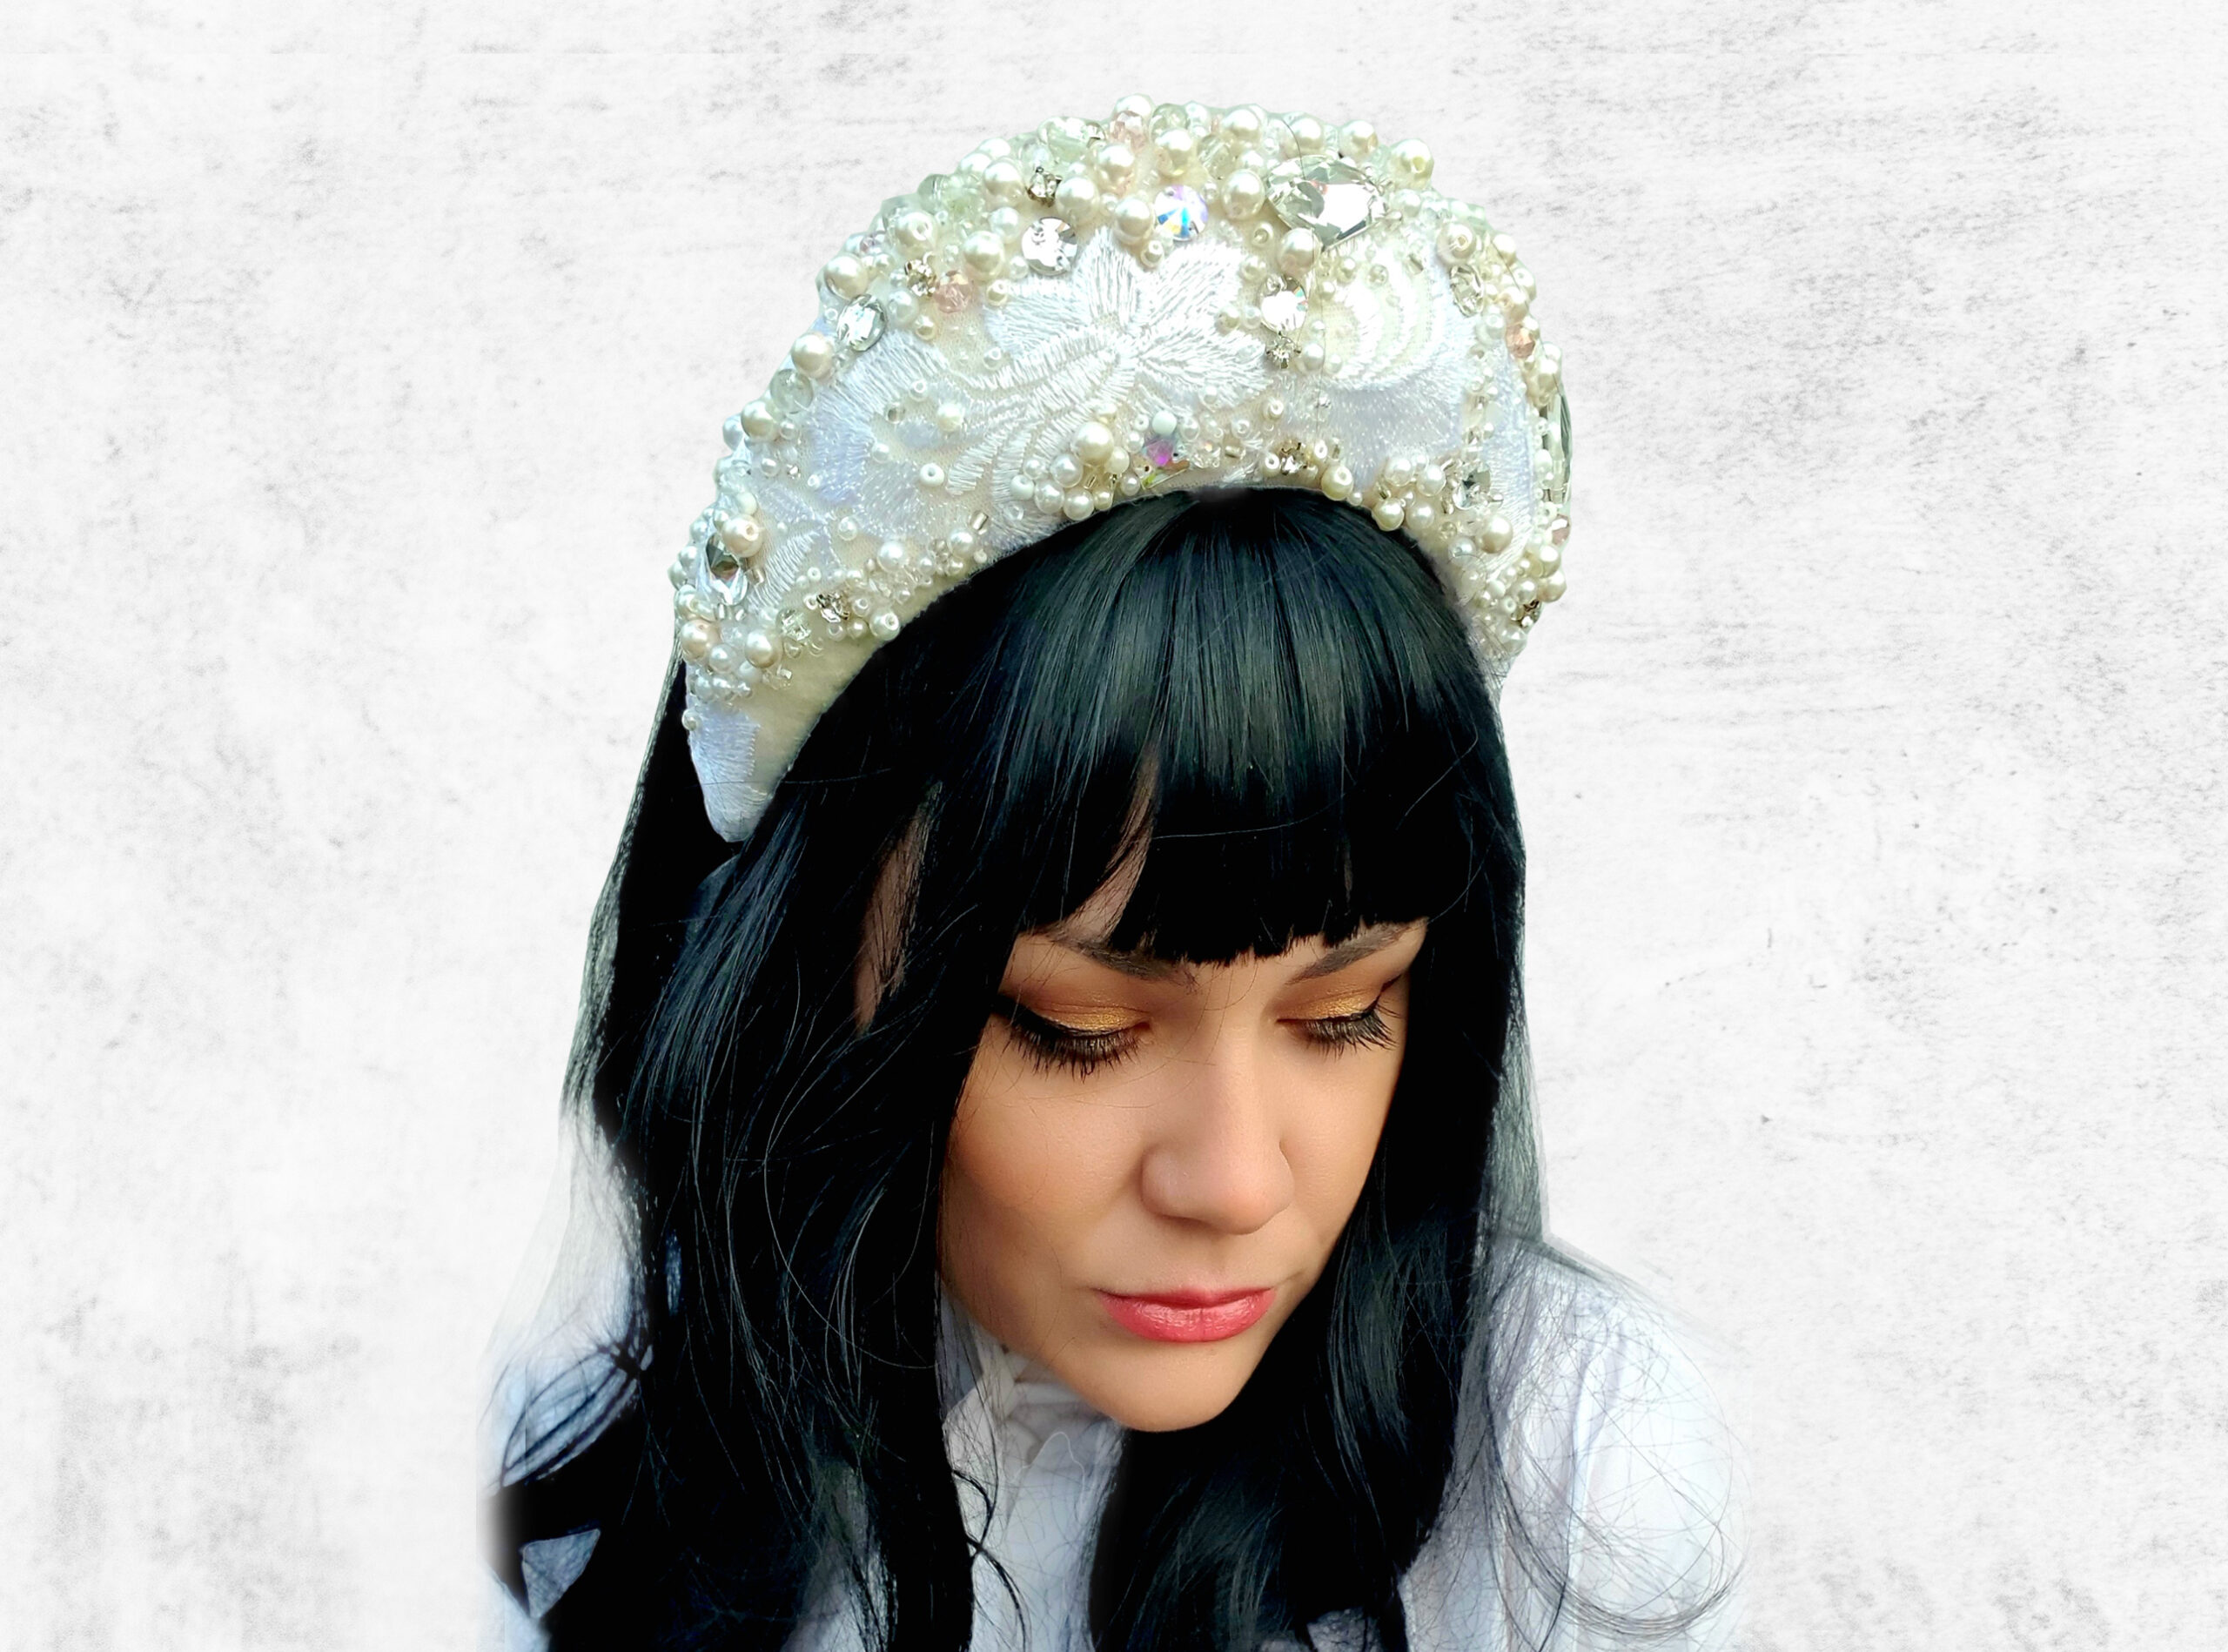 Wool HeadBand shrounded with floral lace and stitched with beads and swarovski cristals